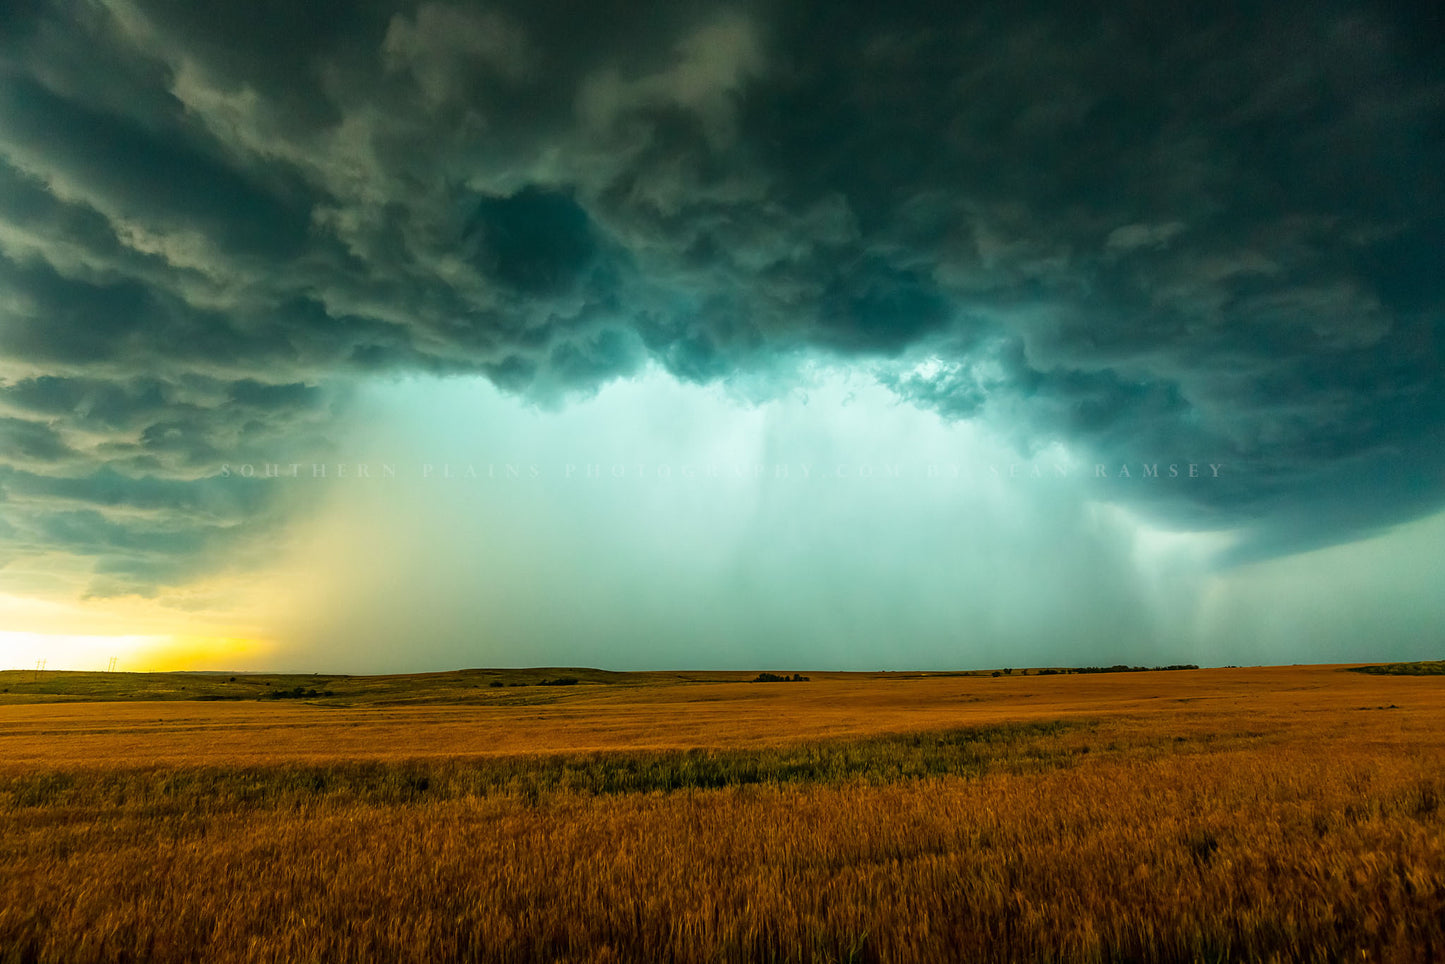 Storm photography print of a powerful supercell thunderstorm dropping a large amount of rain over an amber wheat field on a spring day in Oklahoma by Sean Ramsey of Southern Plains Photography.